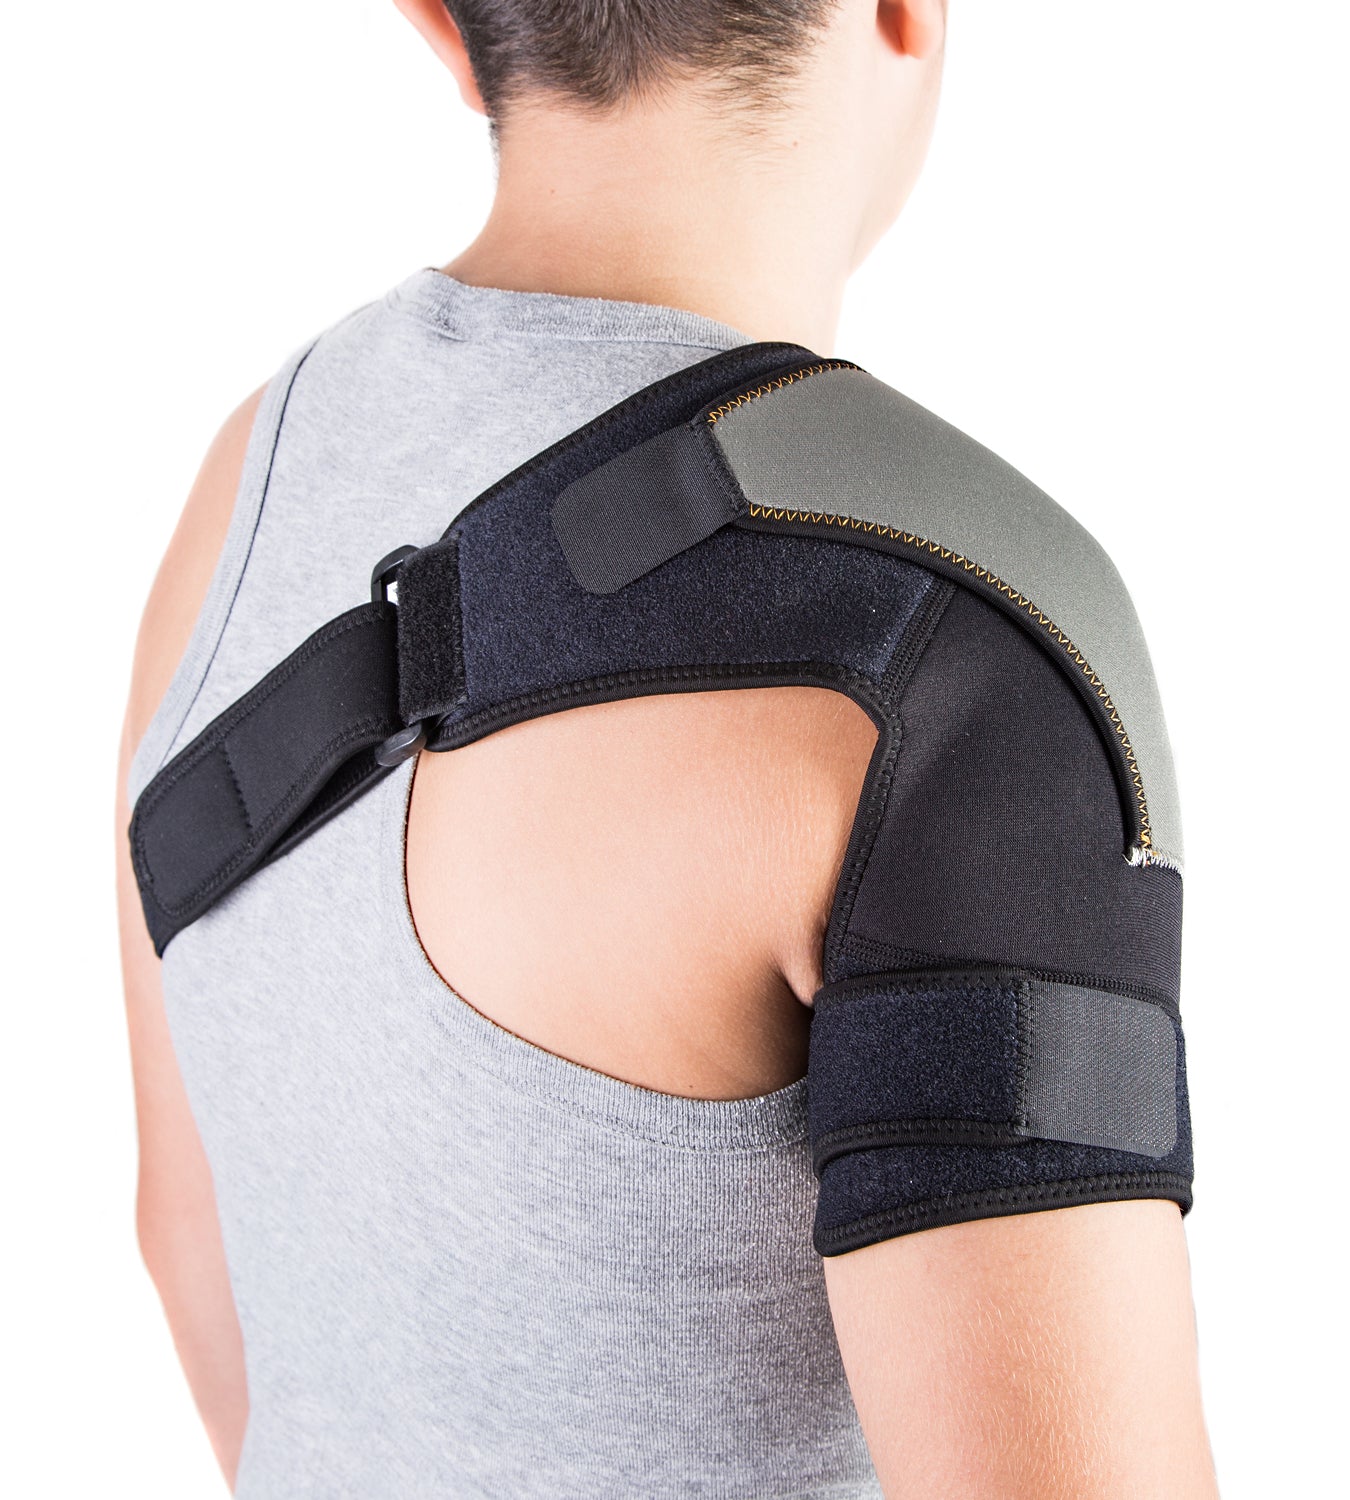 Shoulder Brace for Men and Women - Rotator Cuff Support Brace With